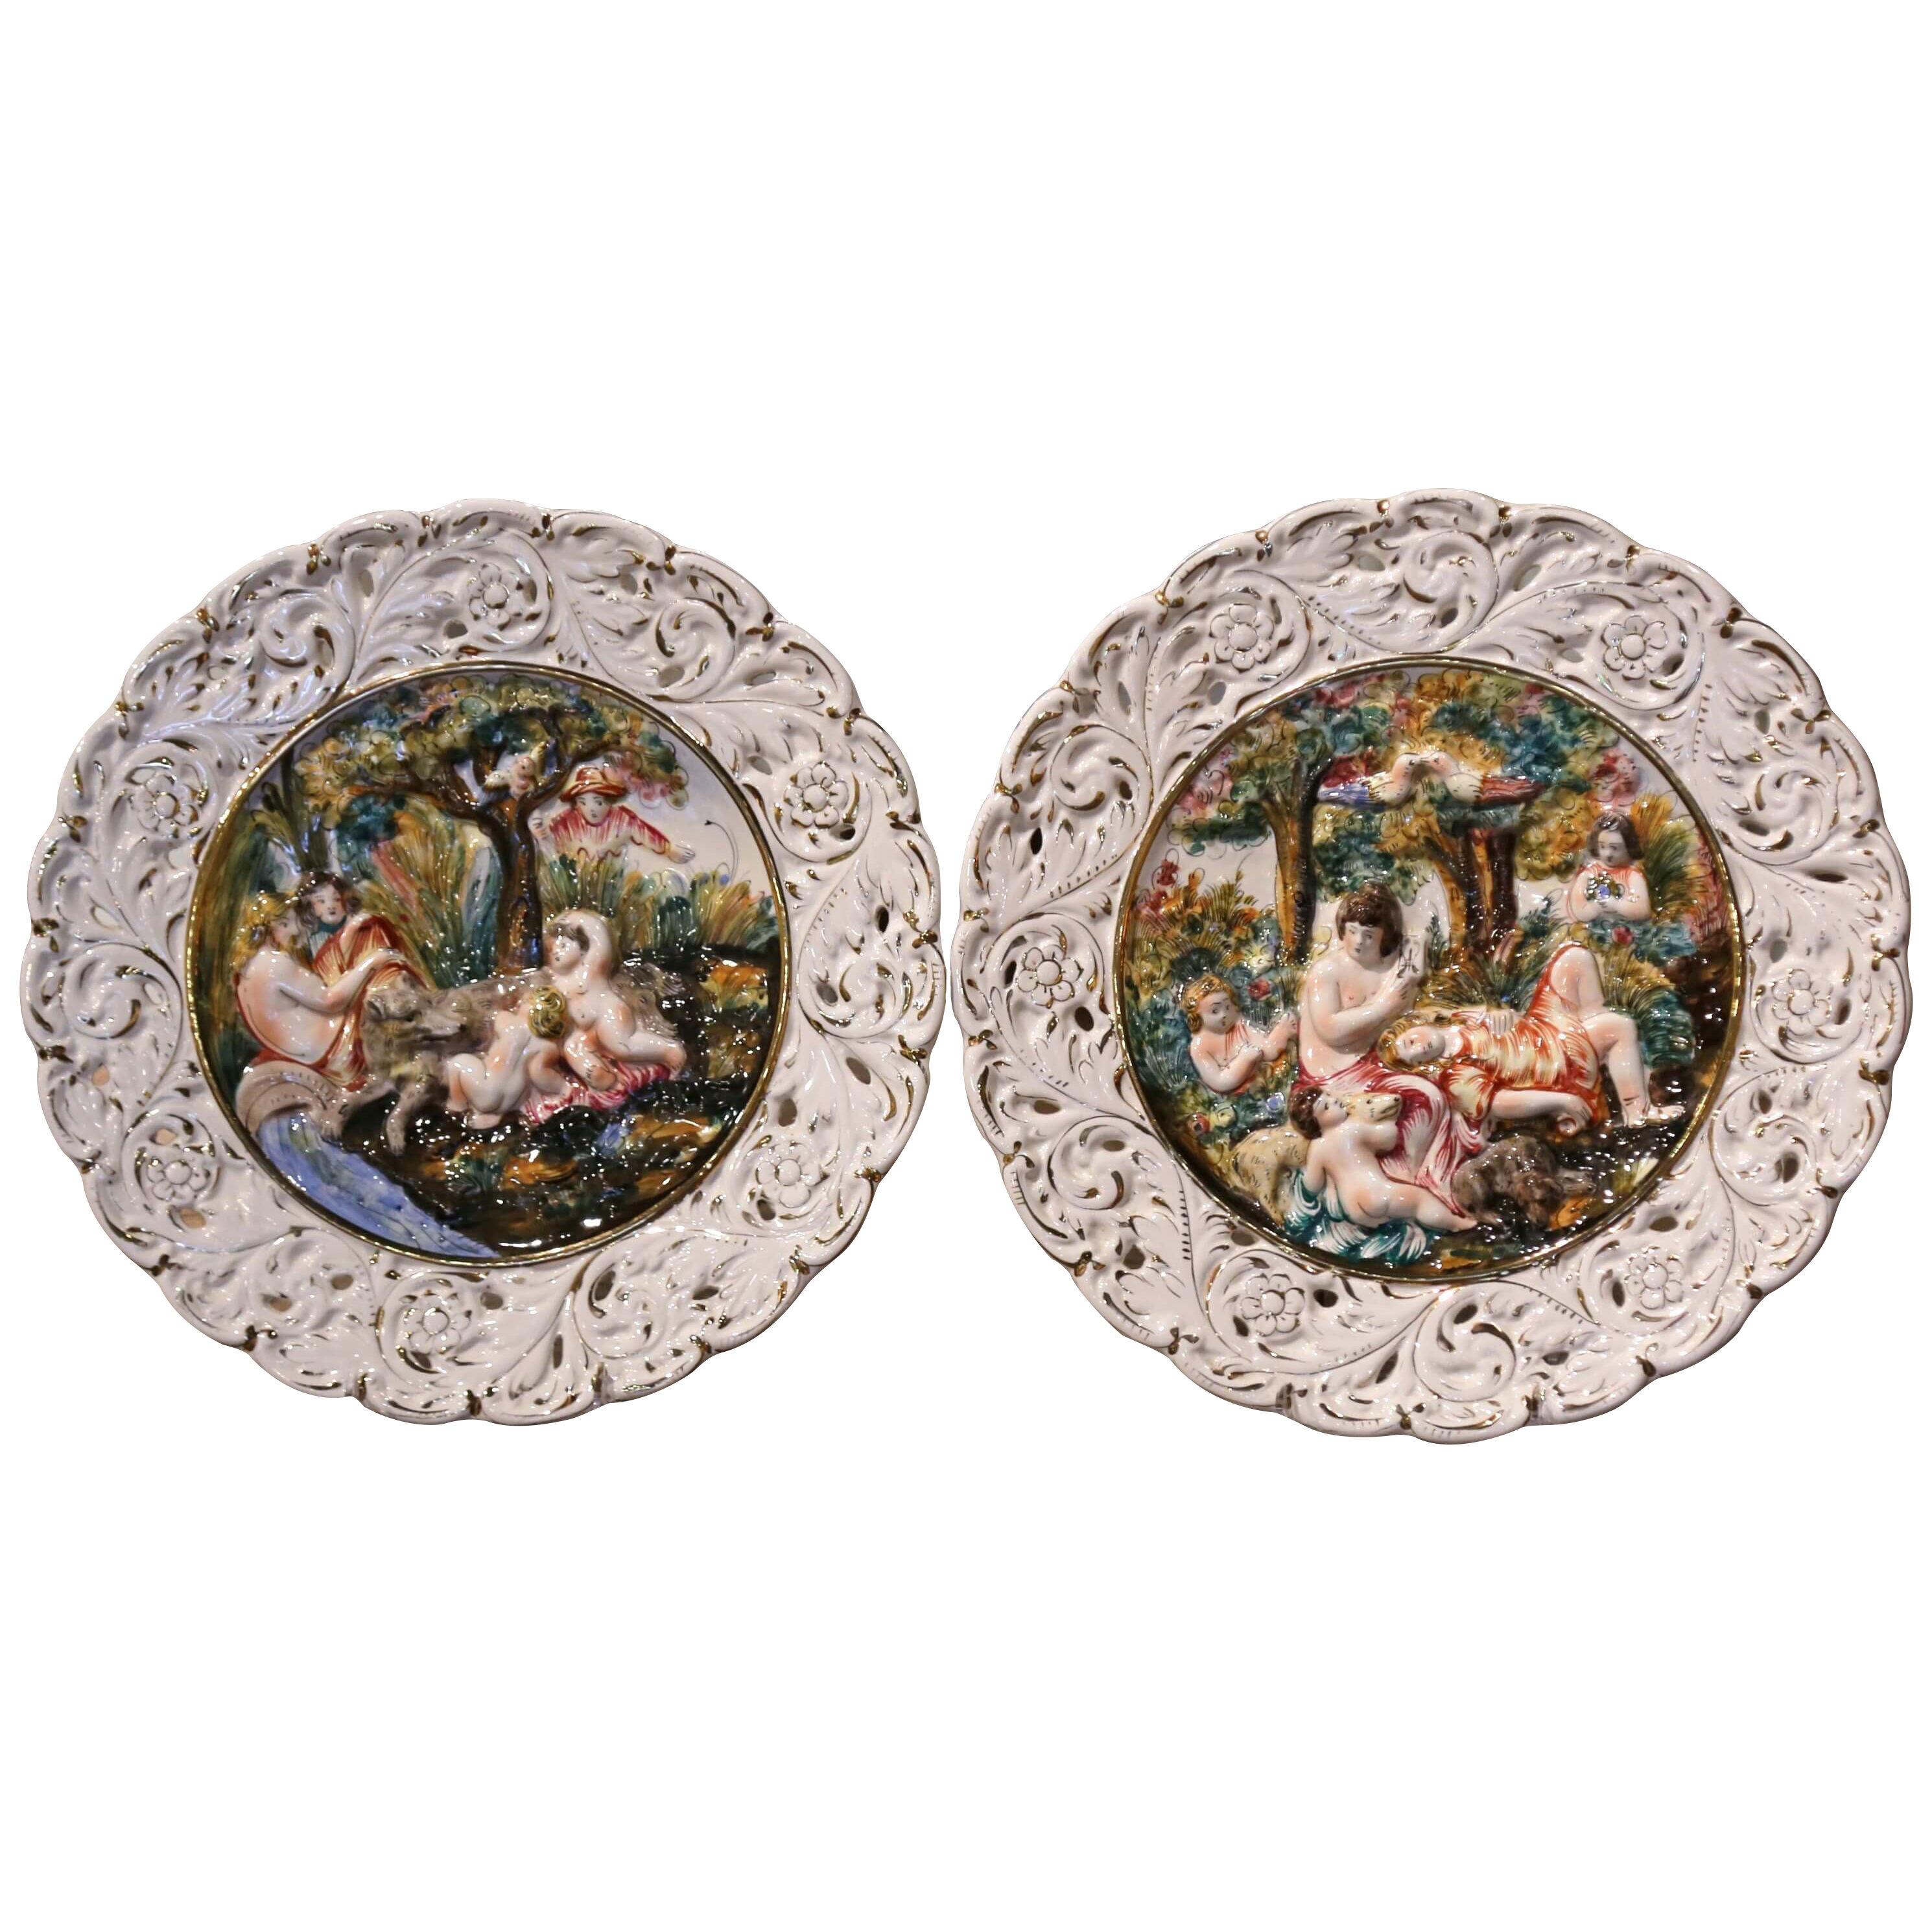 Pair of 20th Century Italian Hand-Painted Porcelain Capodimonte Wall Platters